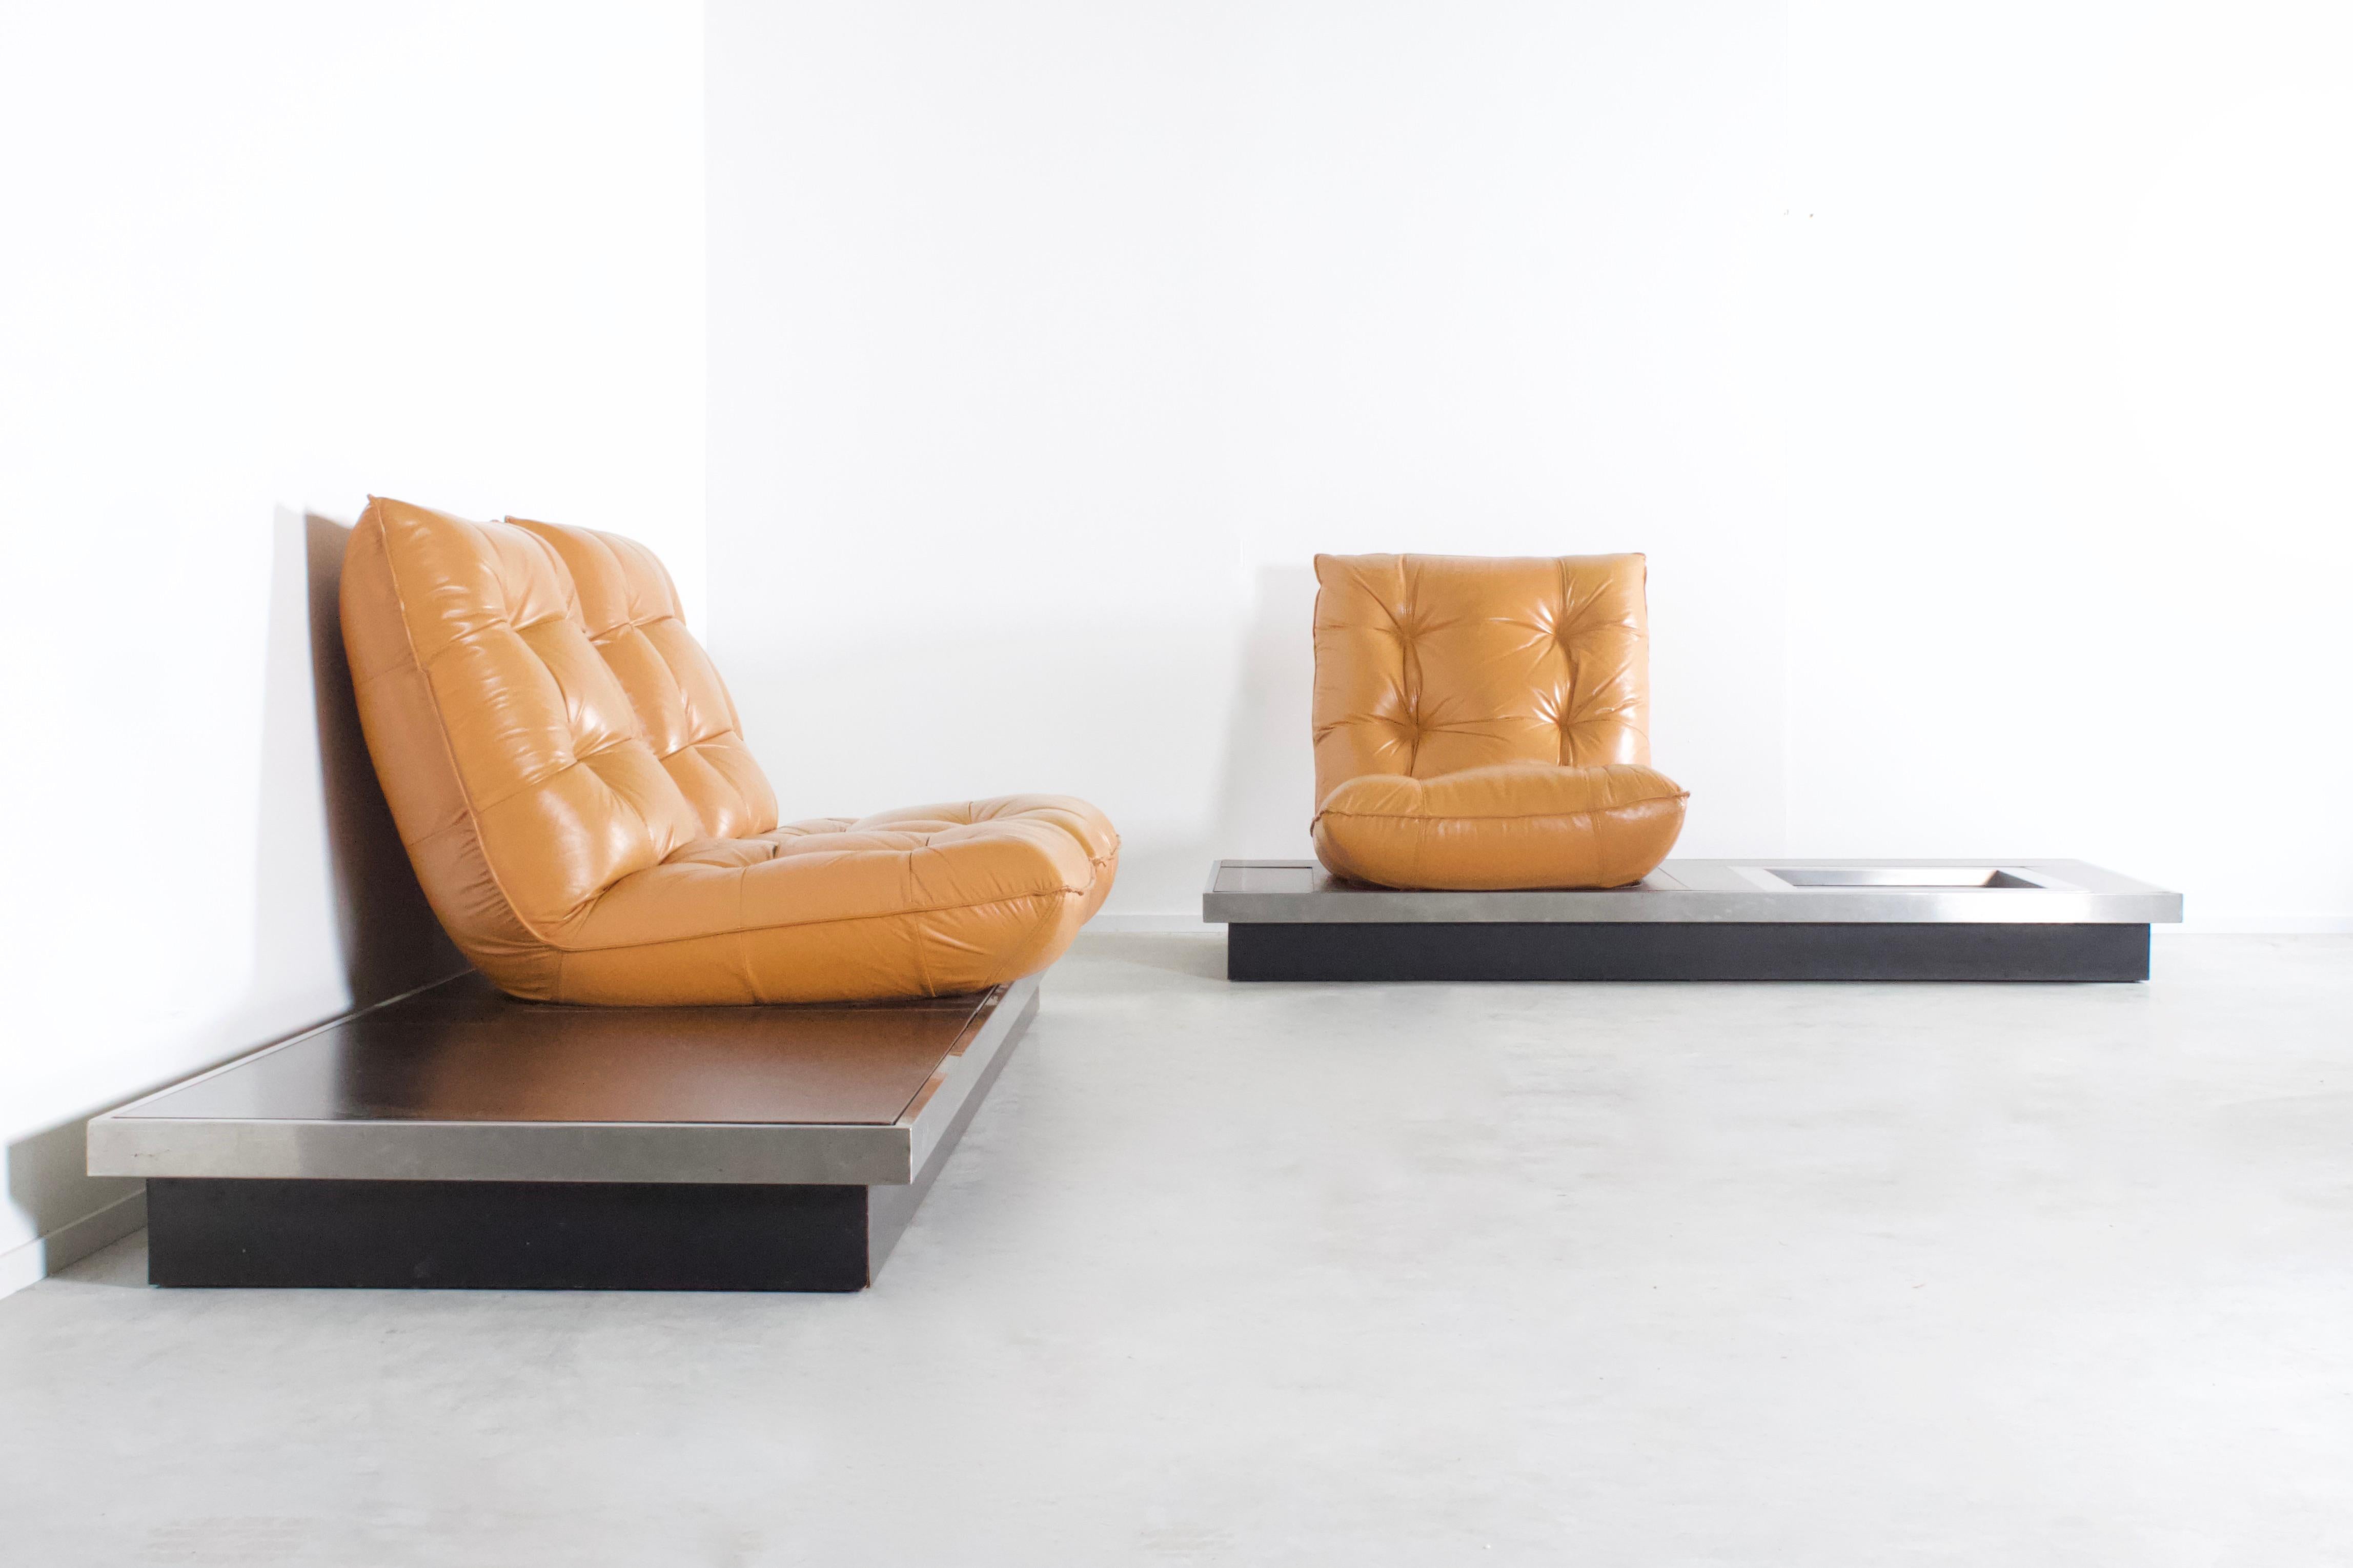 Space Age Ultra Rare Michel Ducaroy Platform Sofas in Cognac Leather, 1970s